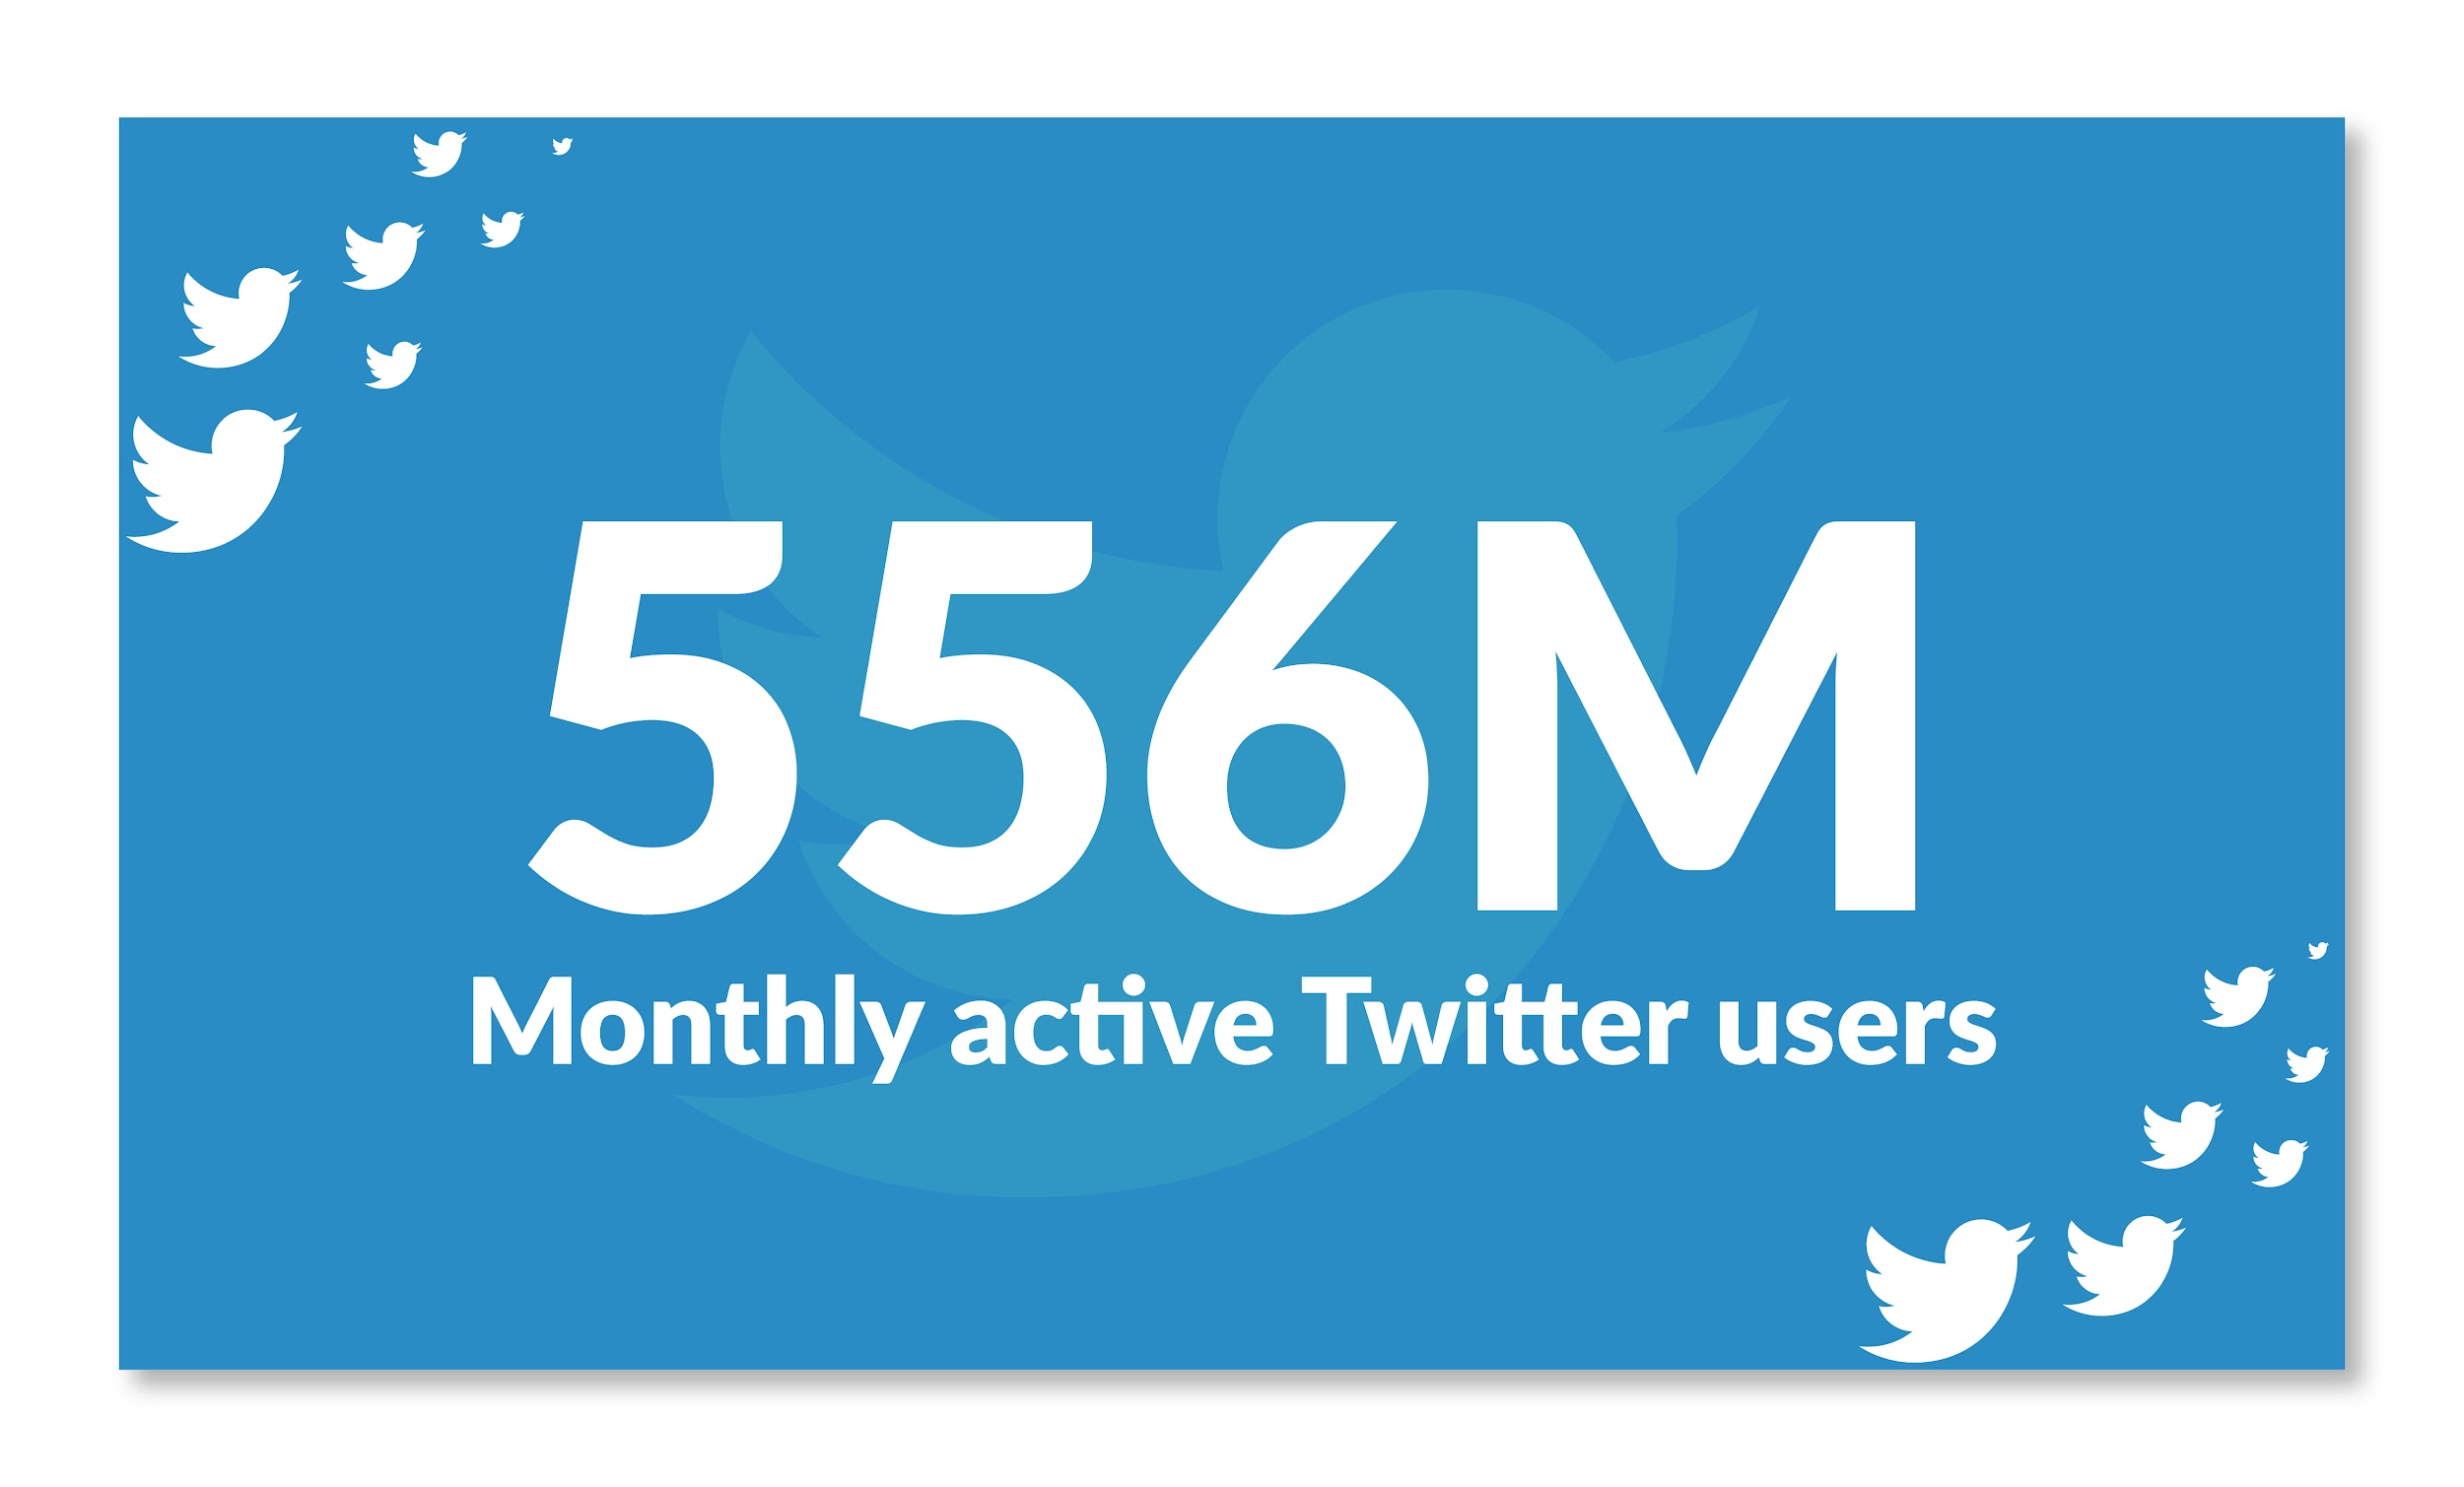 Monthly active Twitter users